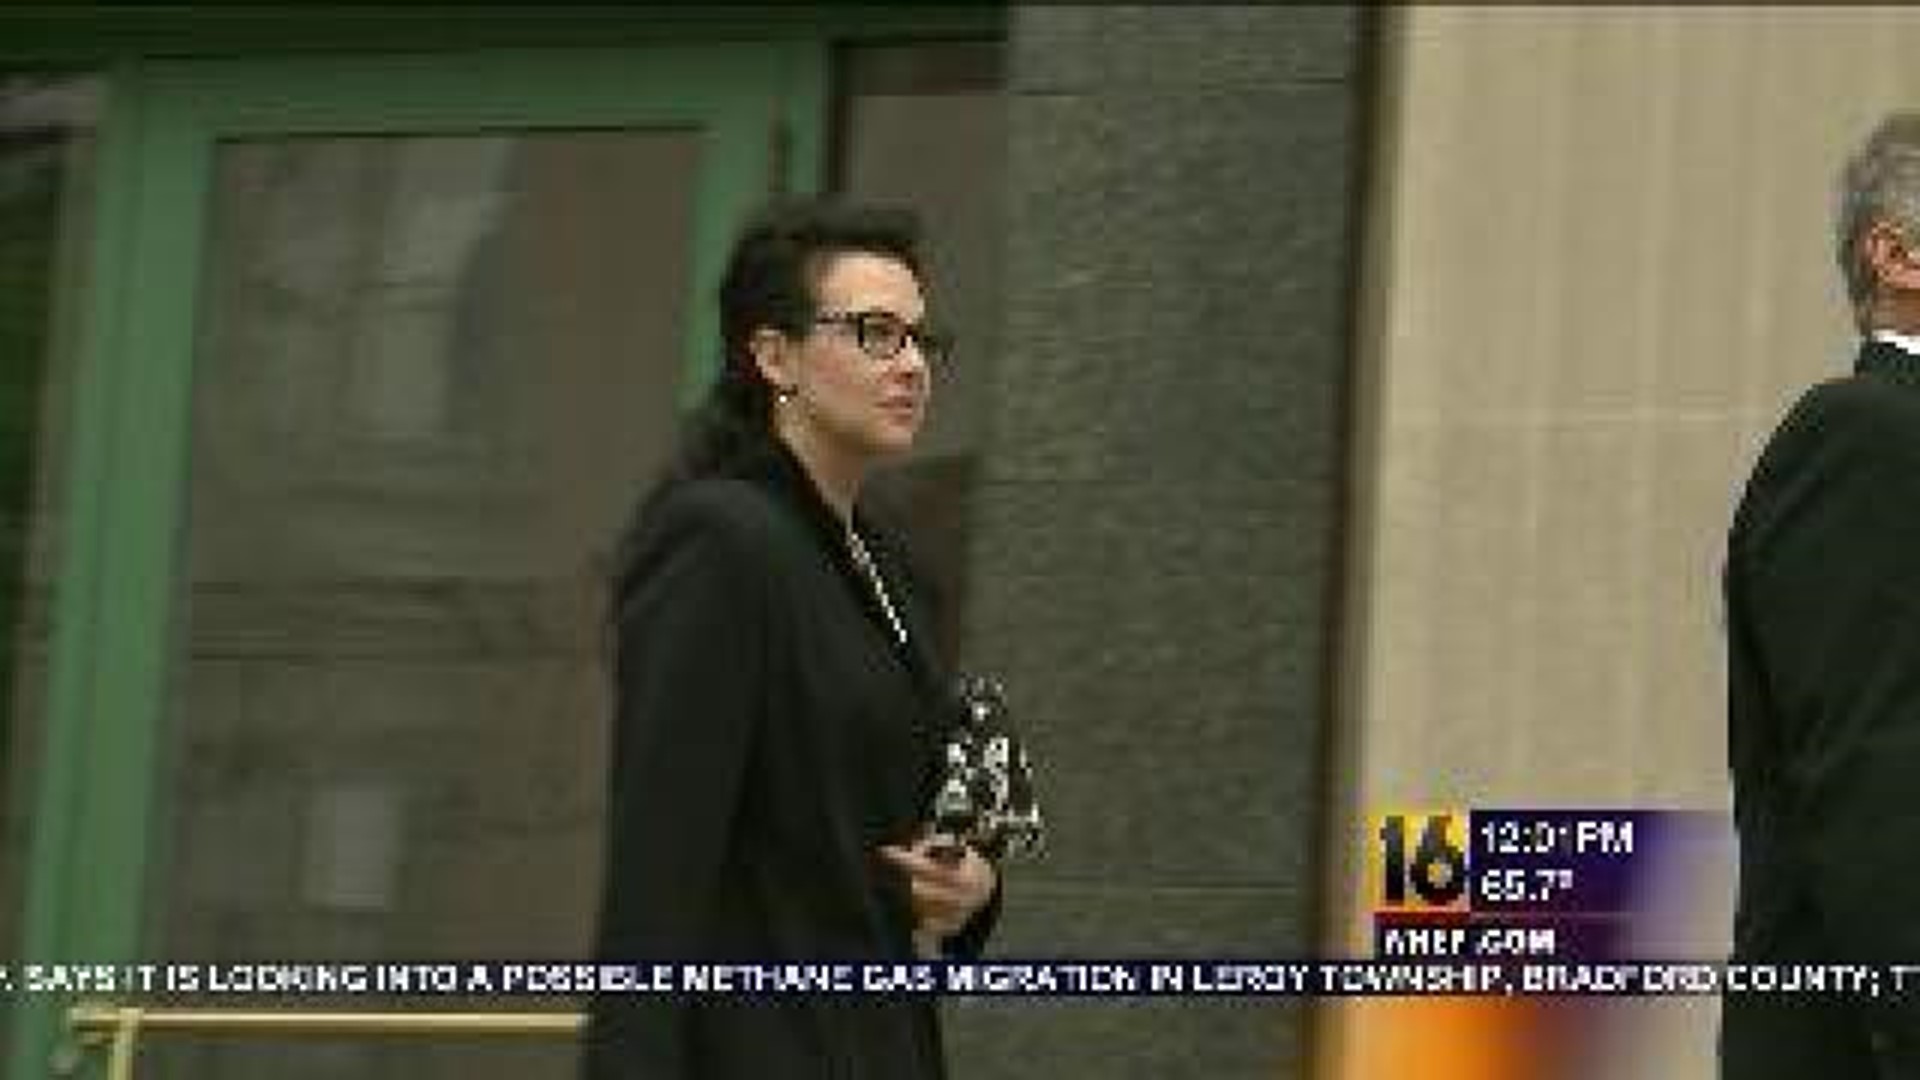 Woman Pleads Guilty to Tax Evasion